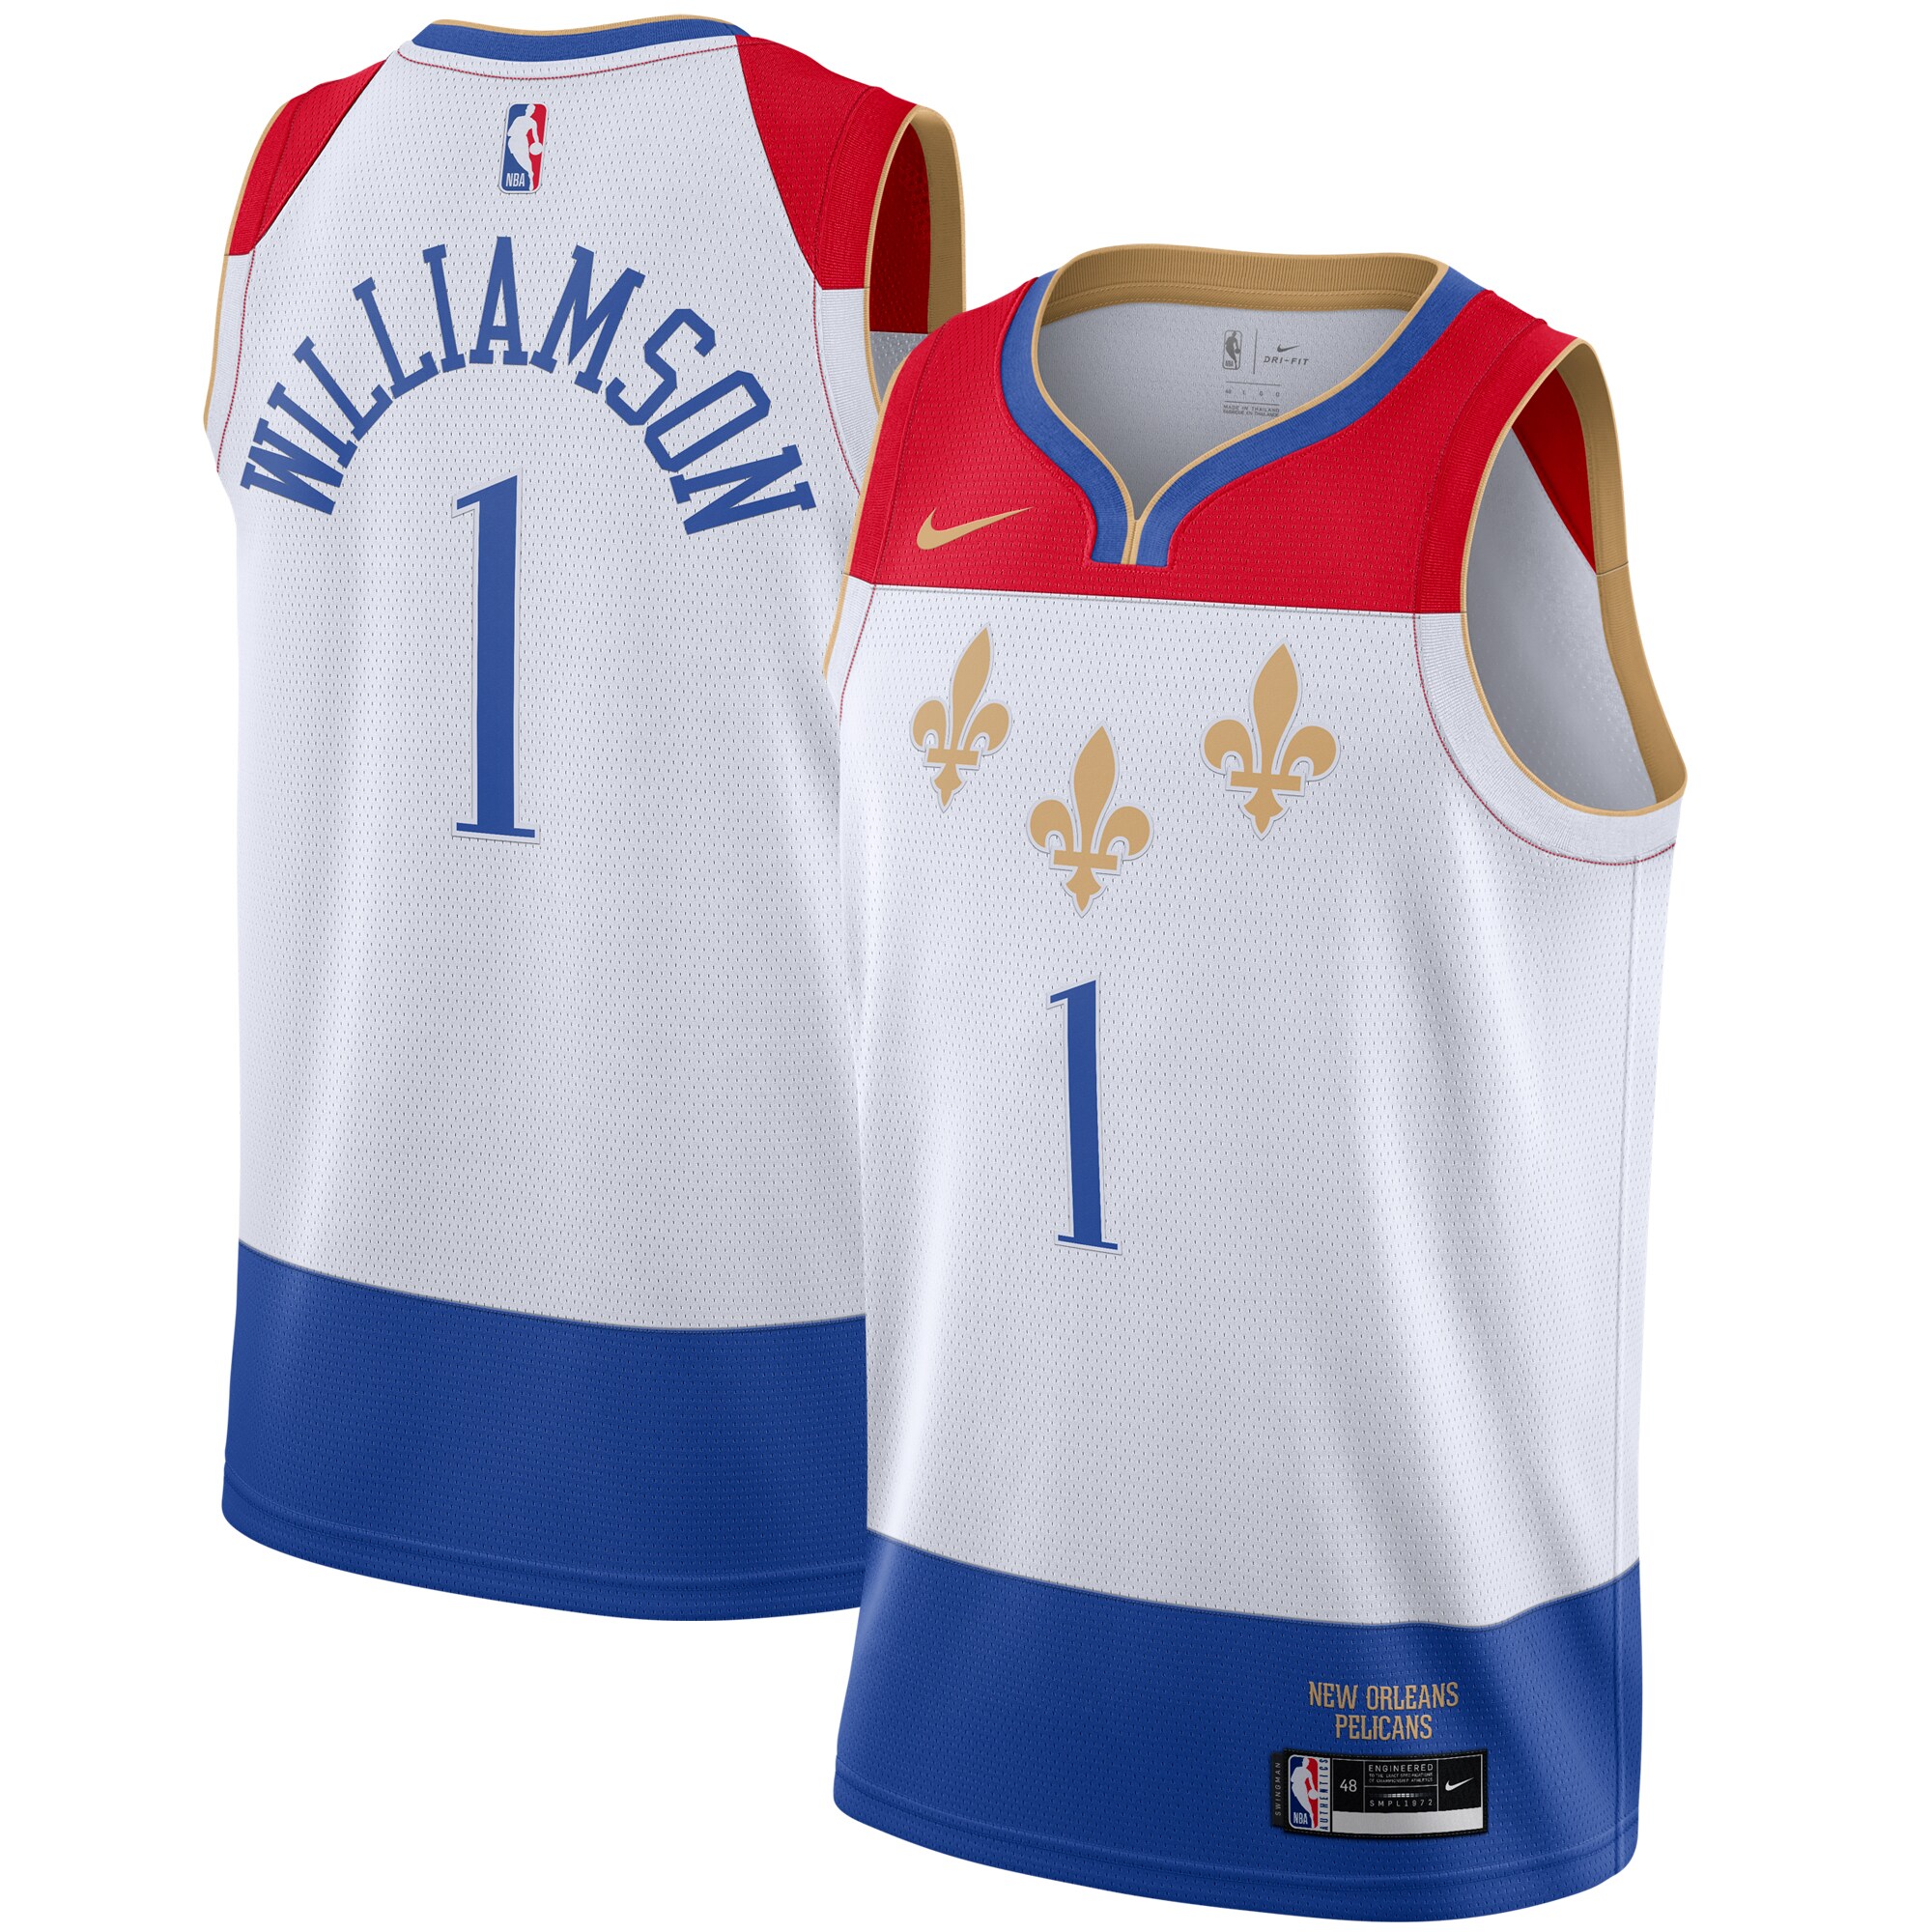 Poll // What Do You Think Of The New Orleans Pelicans' Uniforms?